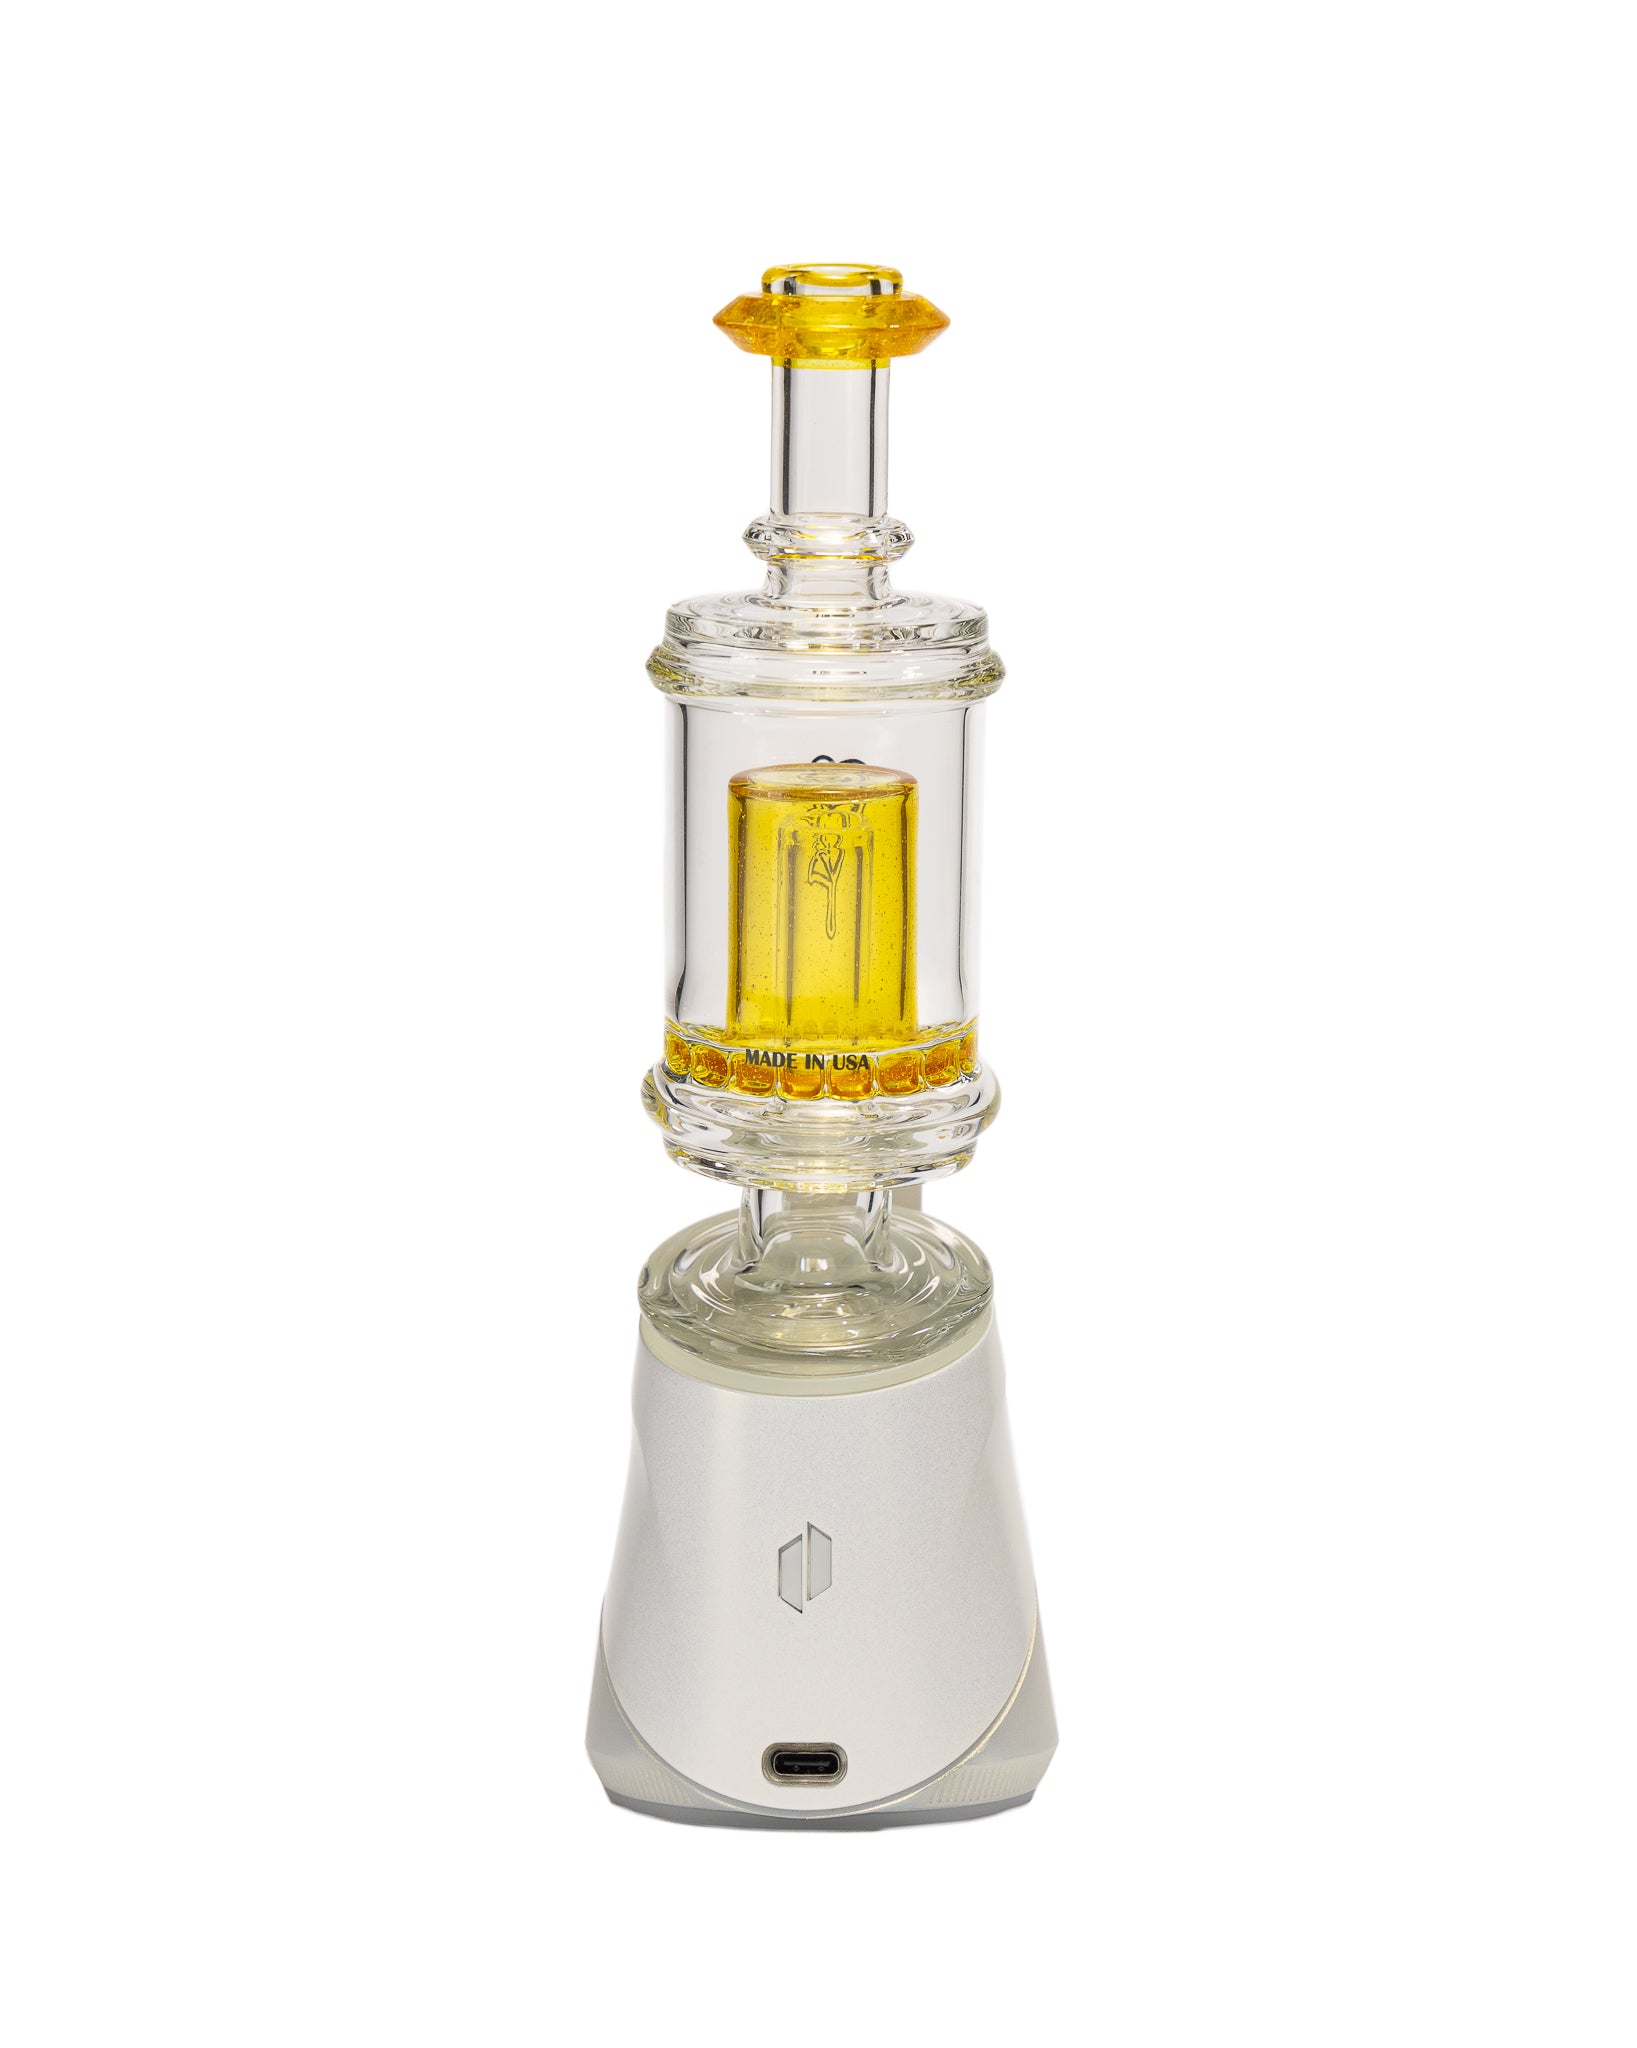 C2 Custom Creations - Clear/Yellow Puffco Attachment